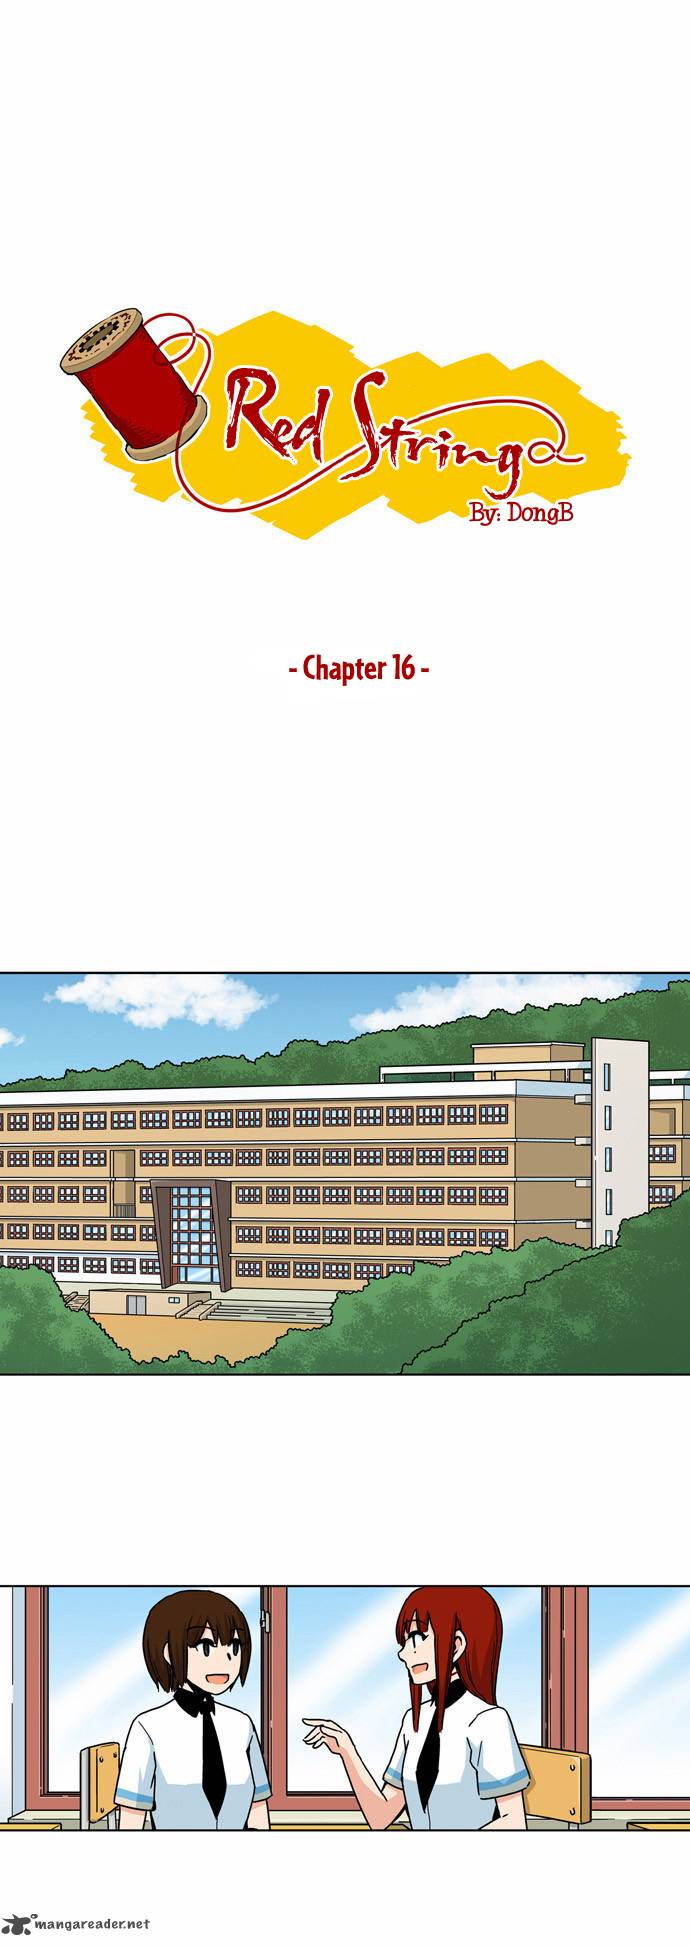 Red String Dong Bi Chapter 16 Page 2